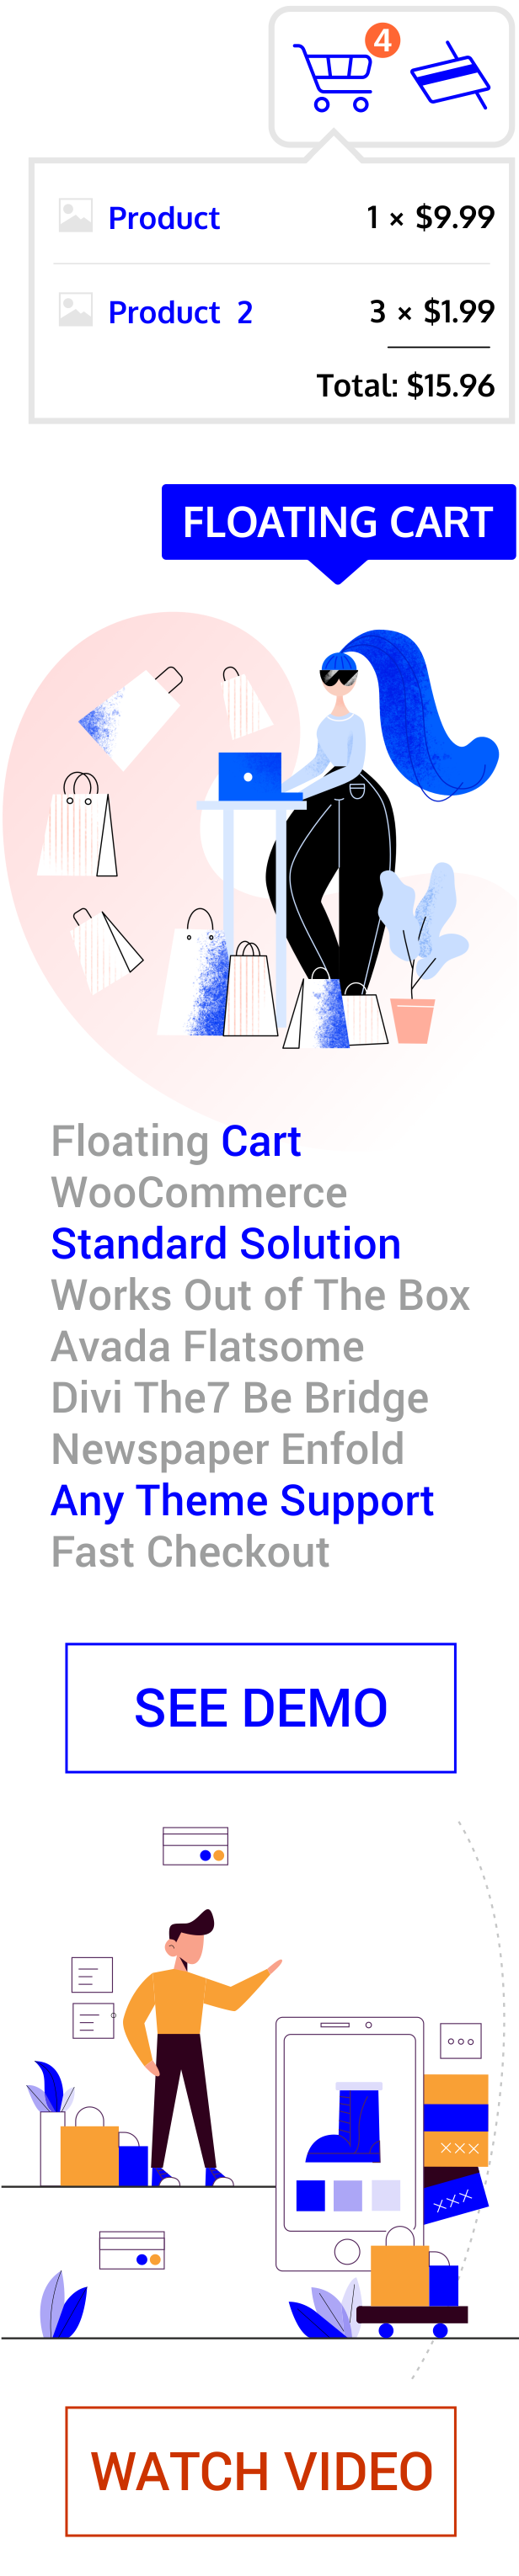 Floating Cart for WooCommerce - 2